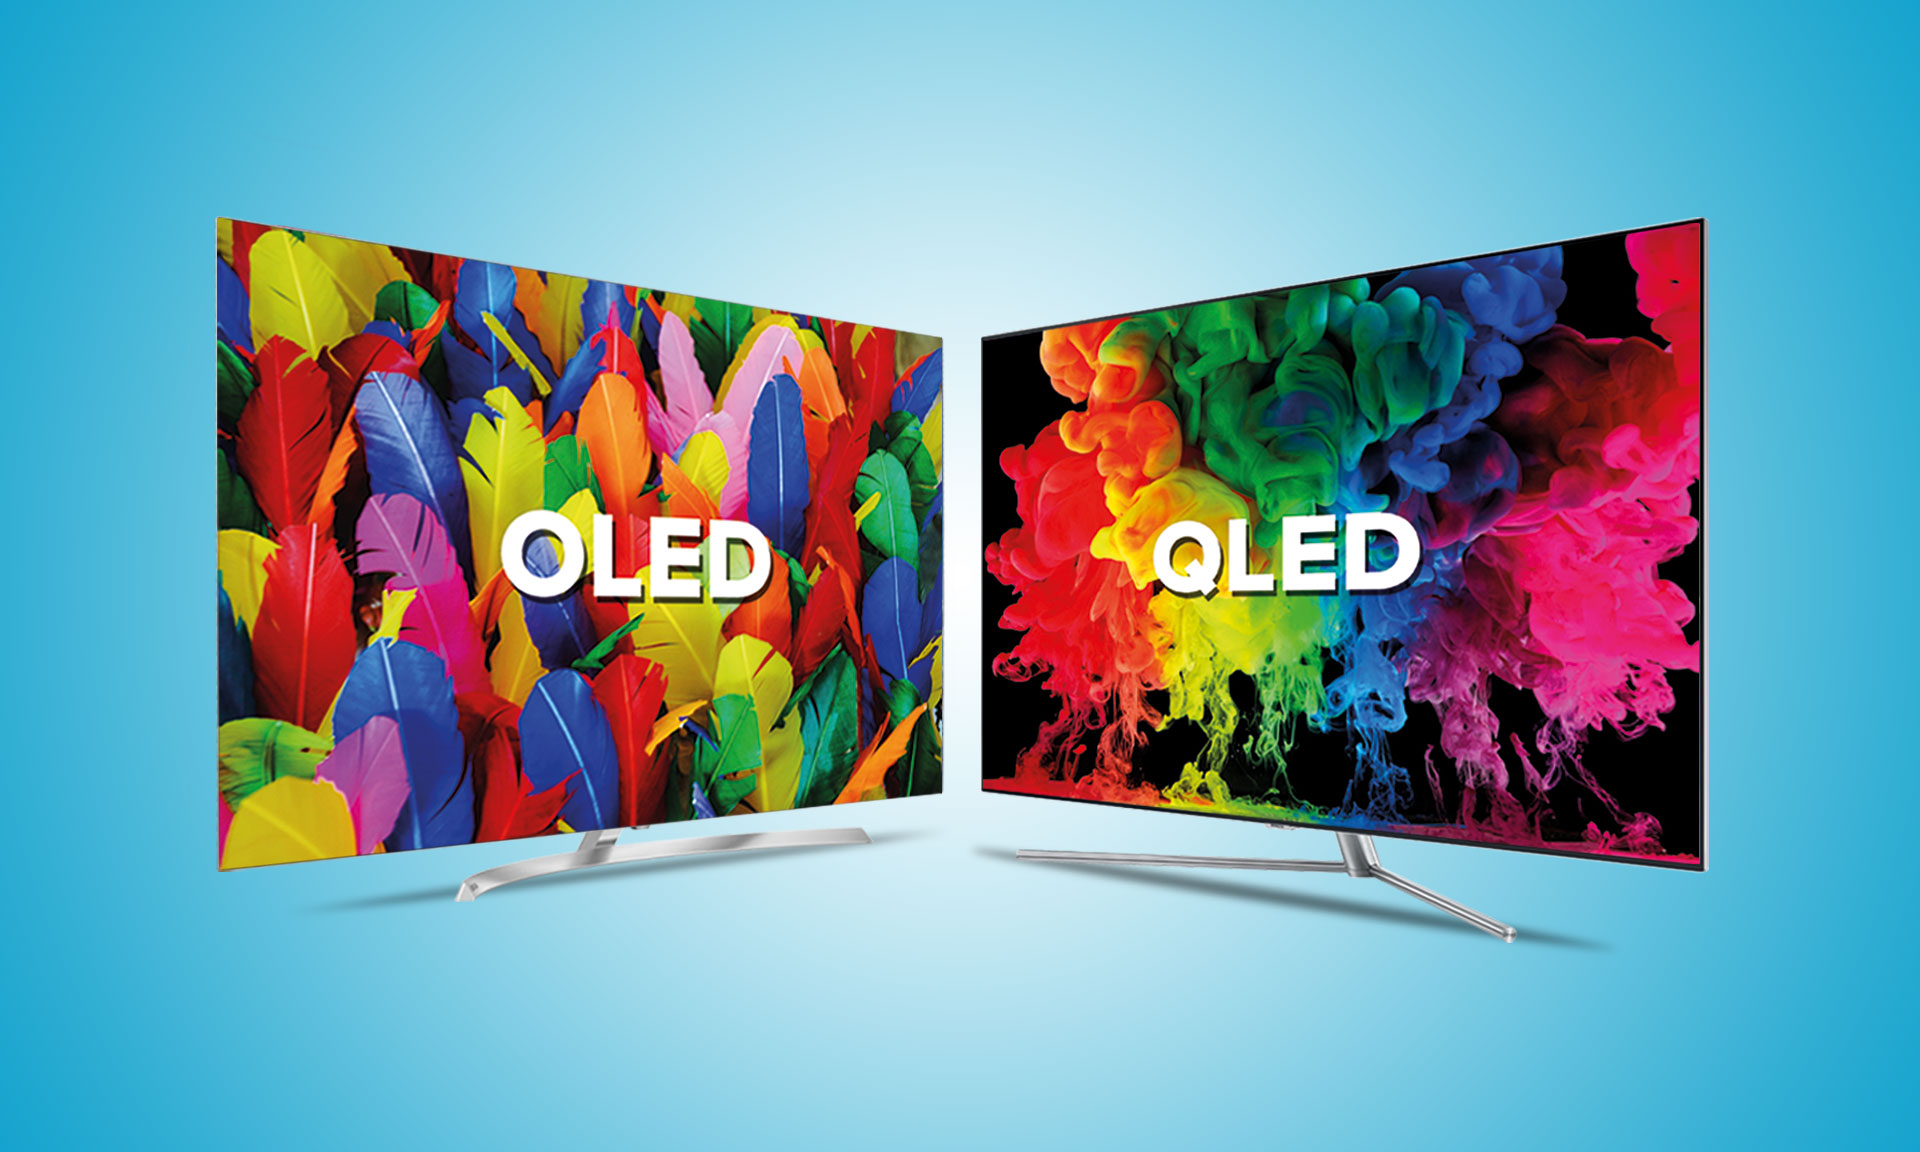 OLED QLED which